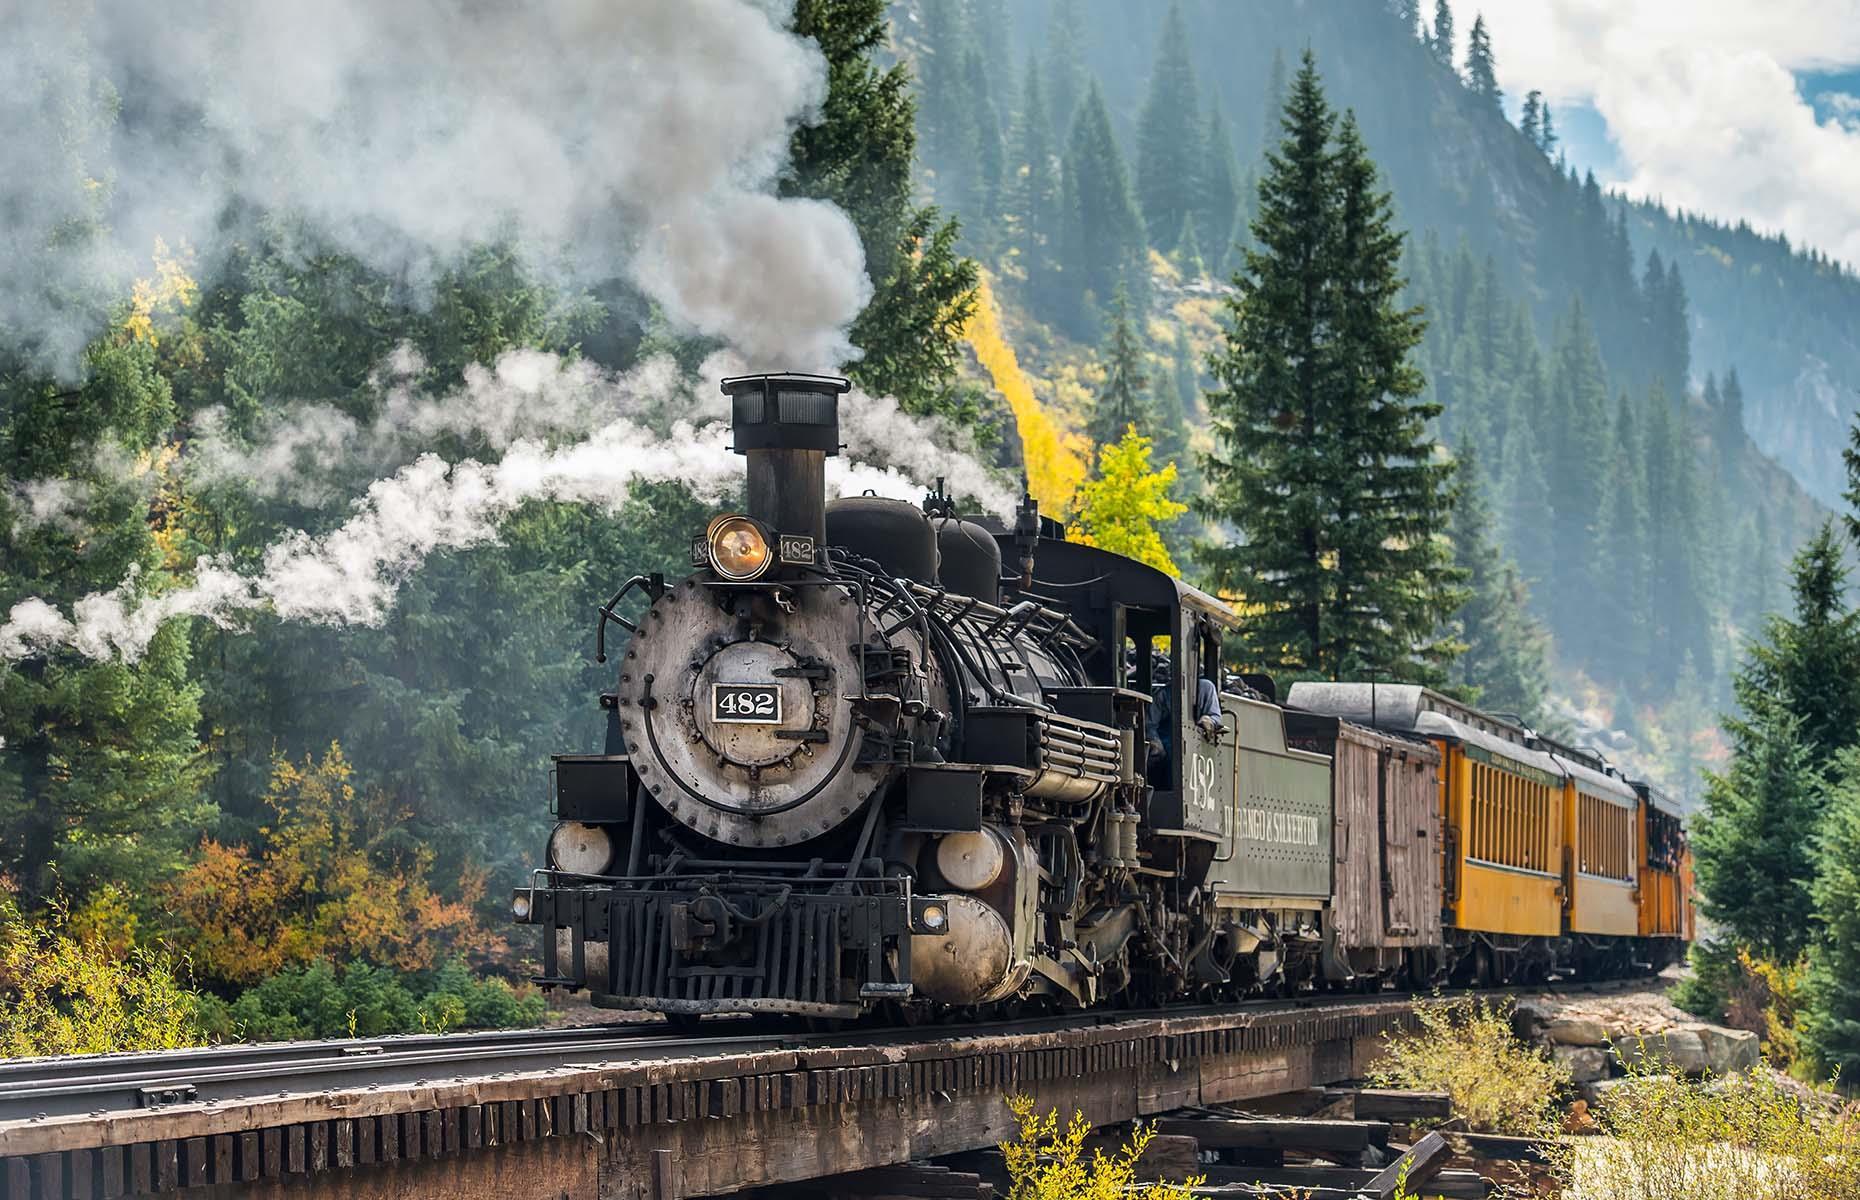 <p>Often listed as one of the world’s greatest routes, the <a href="https://www.durangotrain.com/">Durango & Silverton Narrow Gauge Railroad</a> is a unique journey through America’s history. Original coal-fired locomotives from the 1880s follow in the tracks of countless miners, cowboys and gunslingers from the Old West, giving an insight into what train travel was like some 140 years ago. In fact, the railroad has even been listed as a National Historic Landmark to protect its heritage. </p>